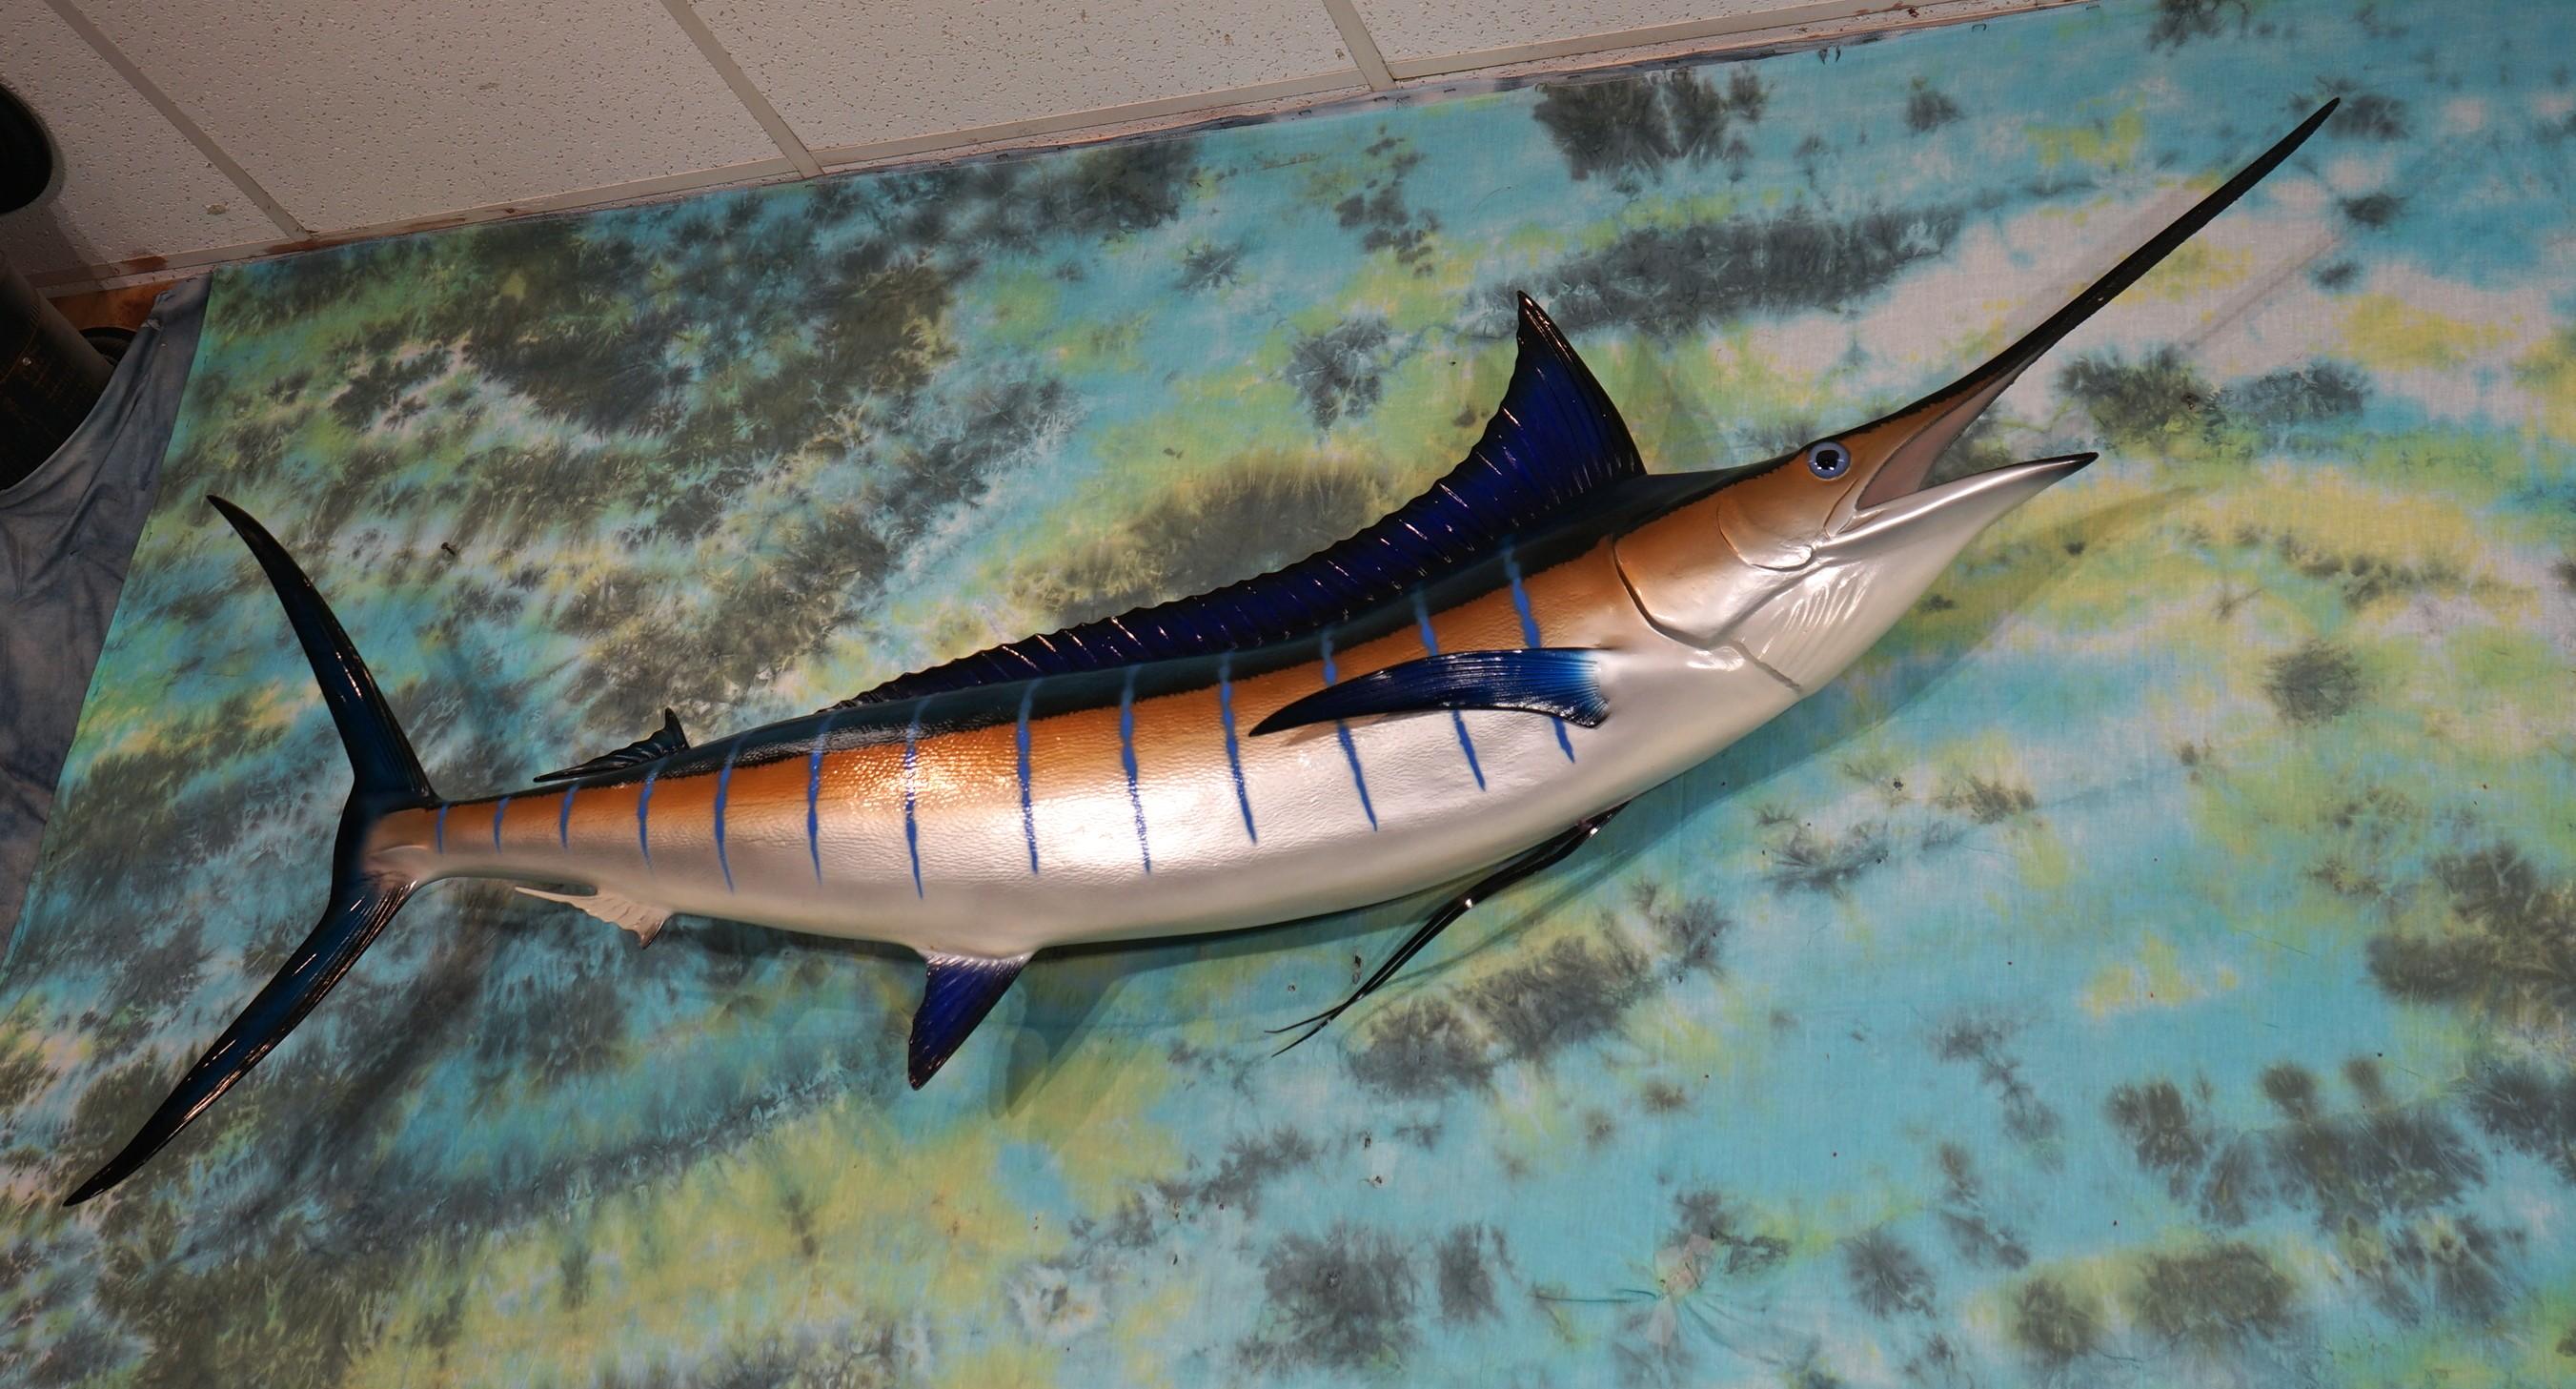 Brand New! White Marlin 6ft. 6 3/4" Fiberglass Reproduction Taxidermy Fish Mount